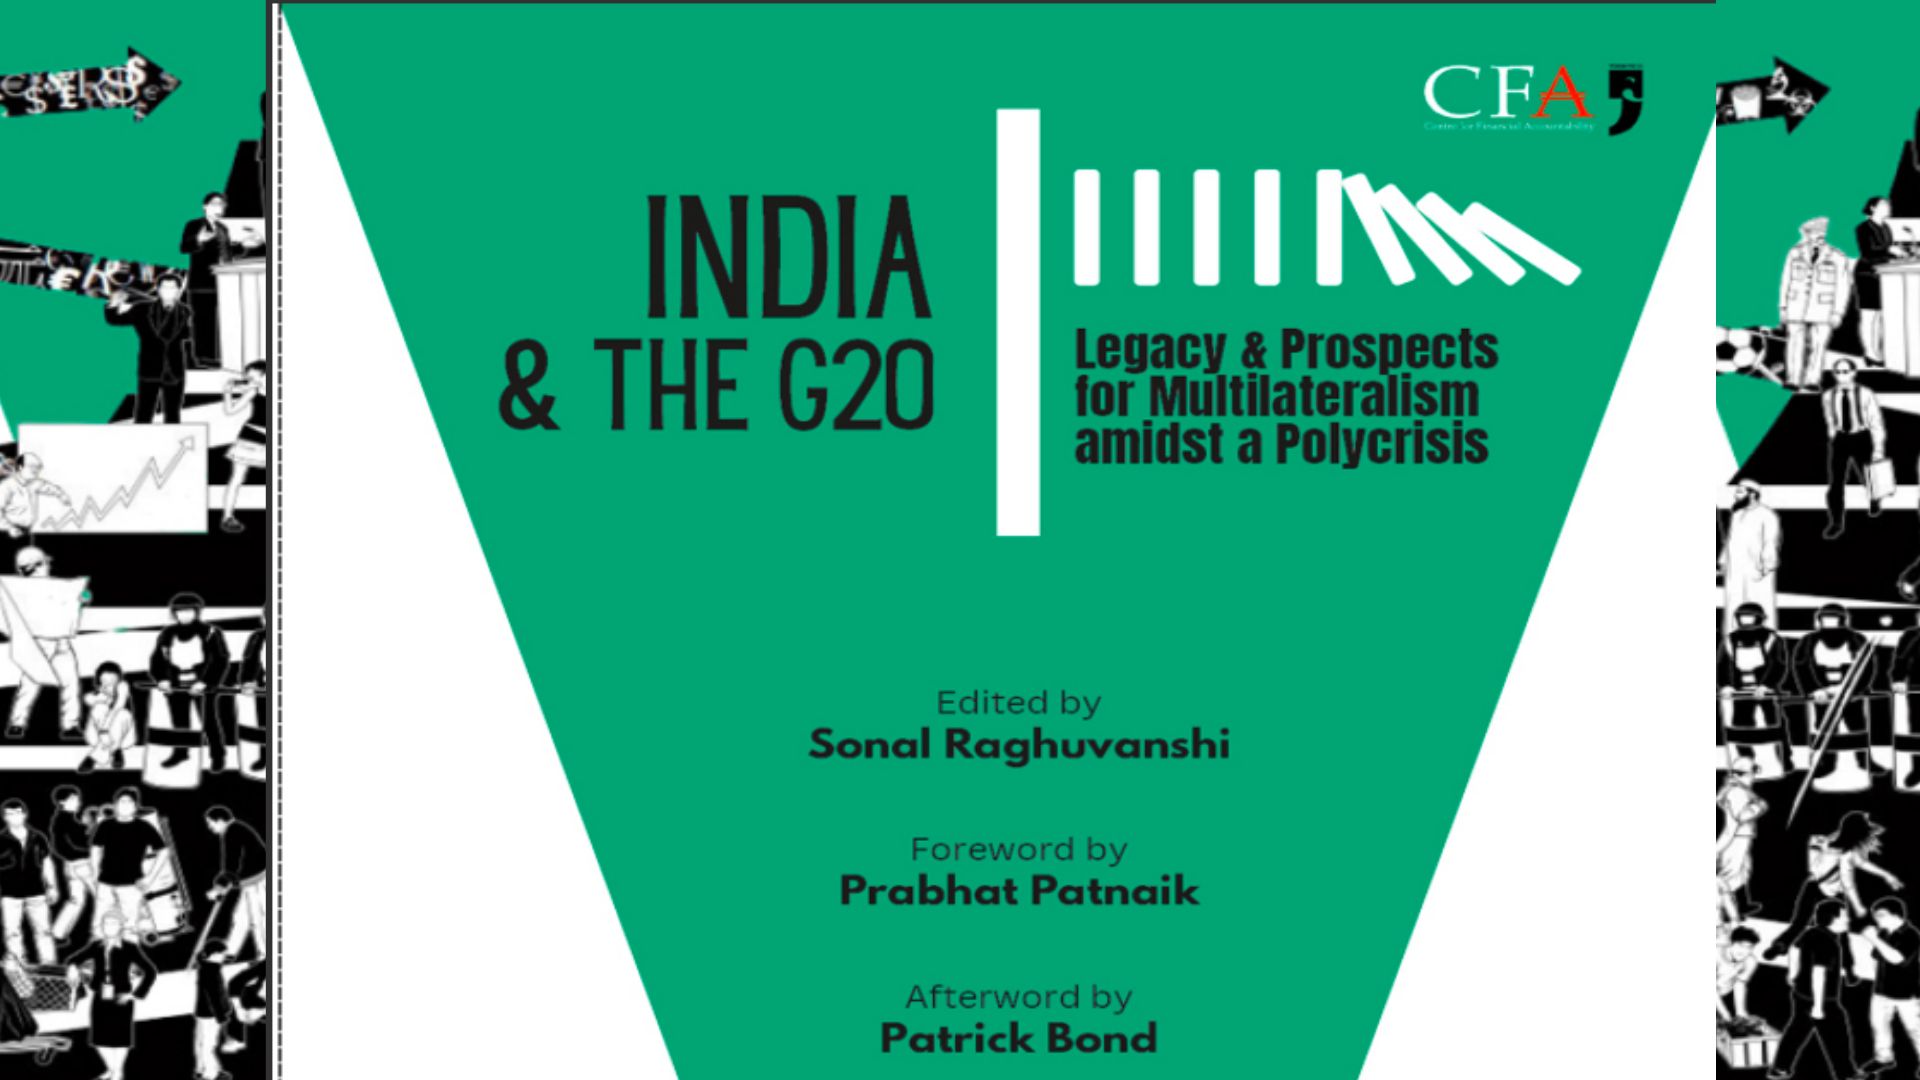 India & G20: Legacy & Prospects for Multilateralism amidst a Polycrisis